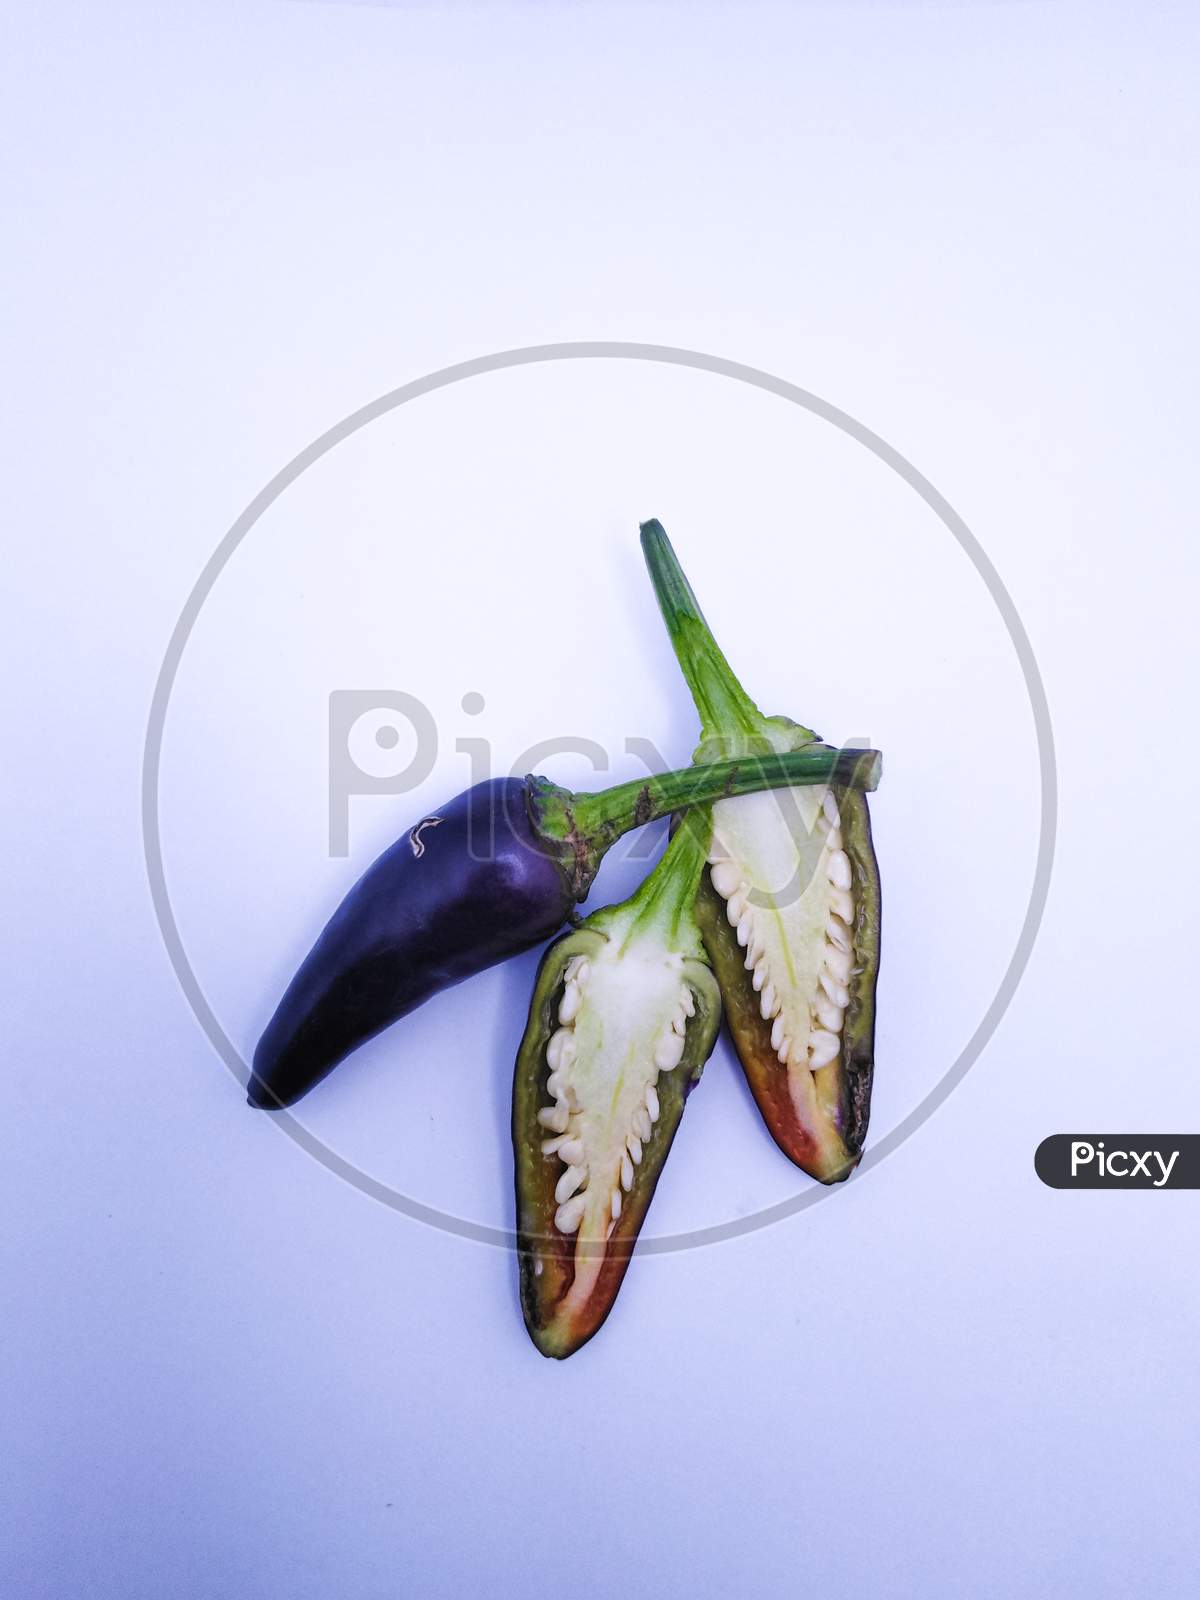 Black peppers flower plant background image